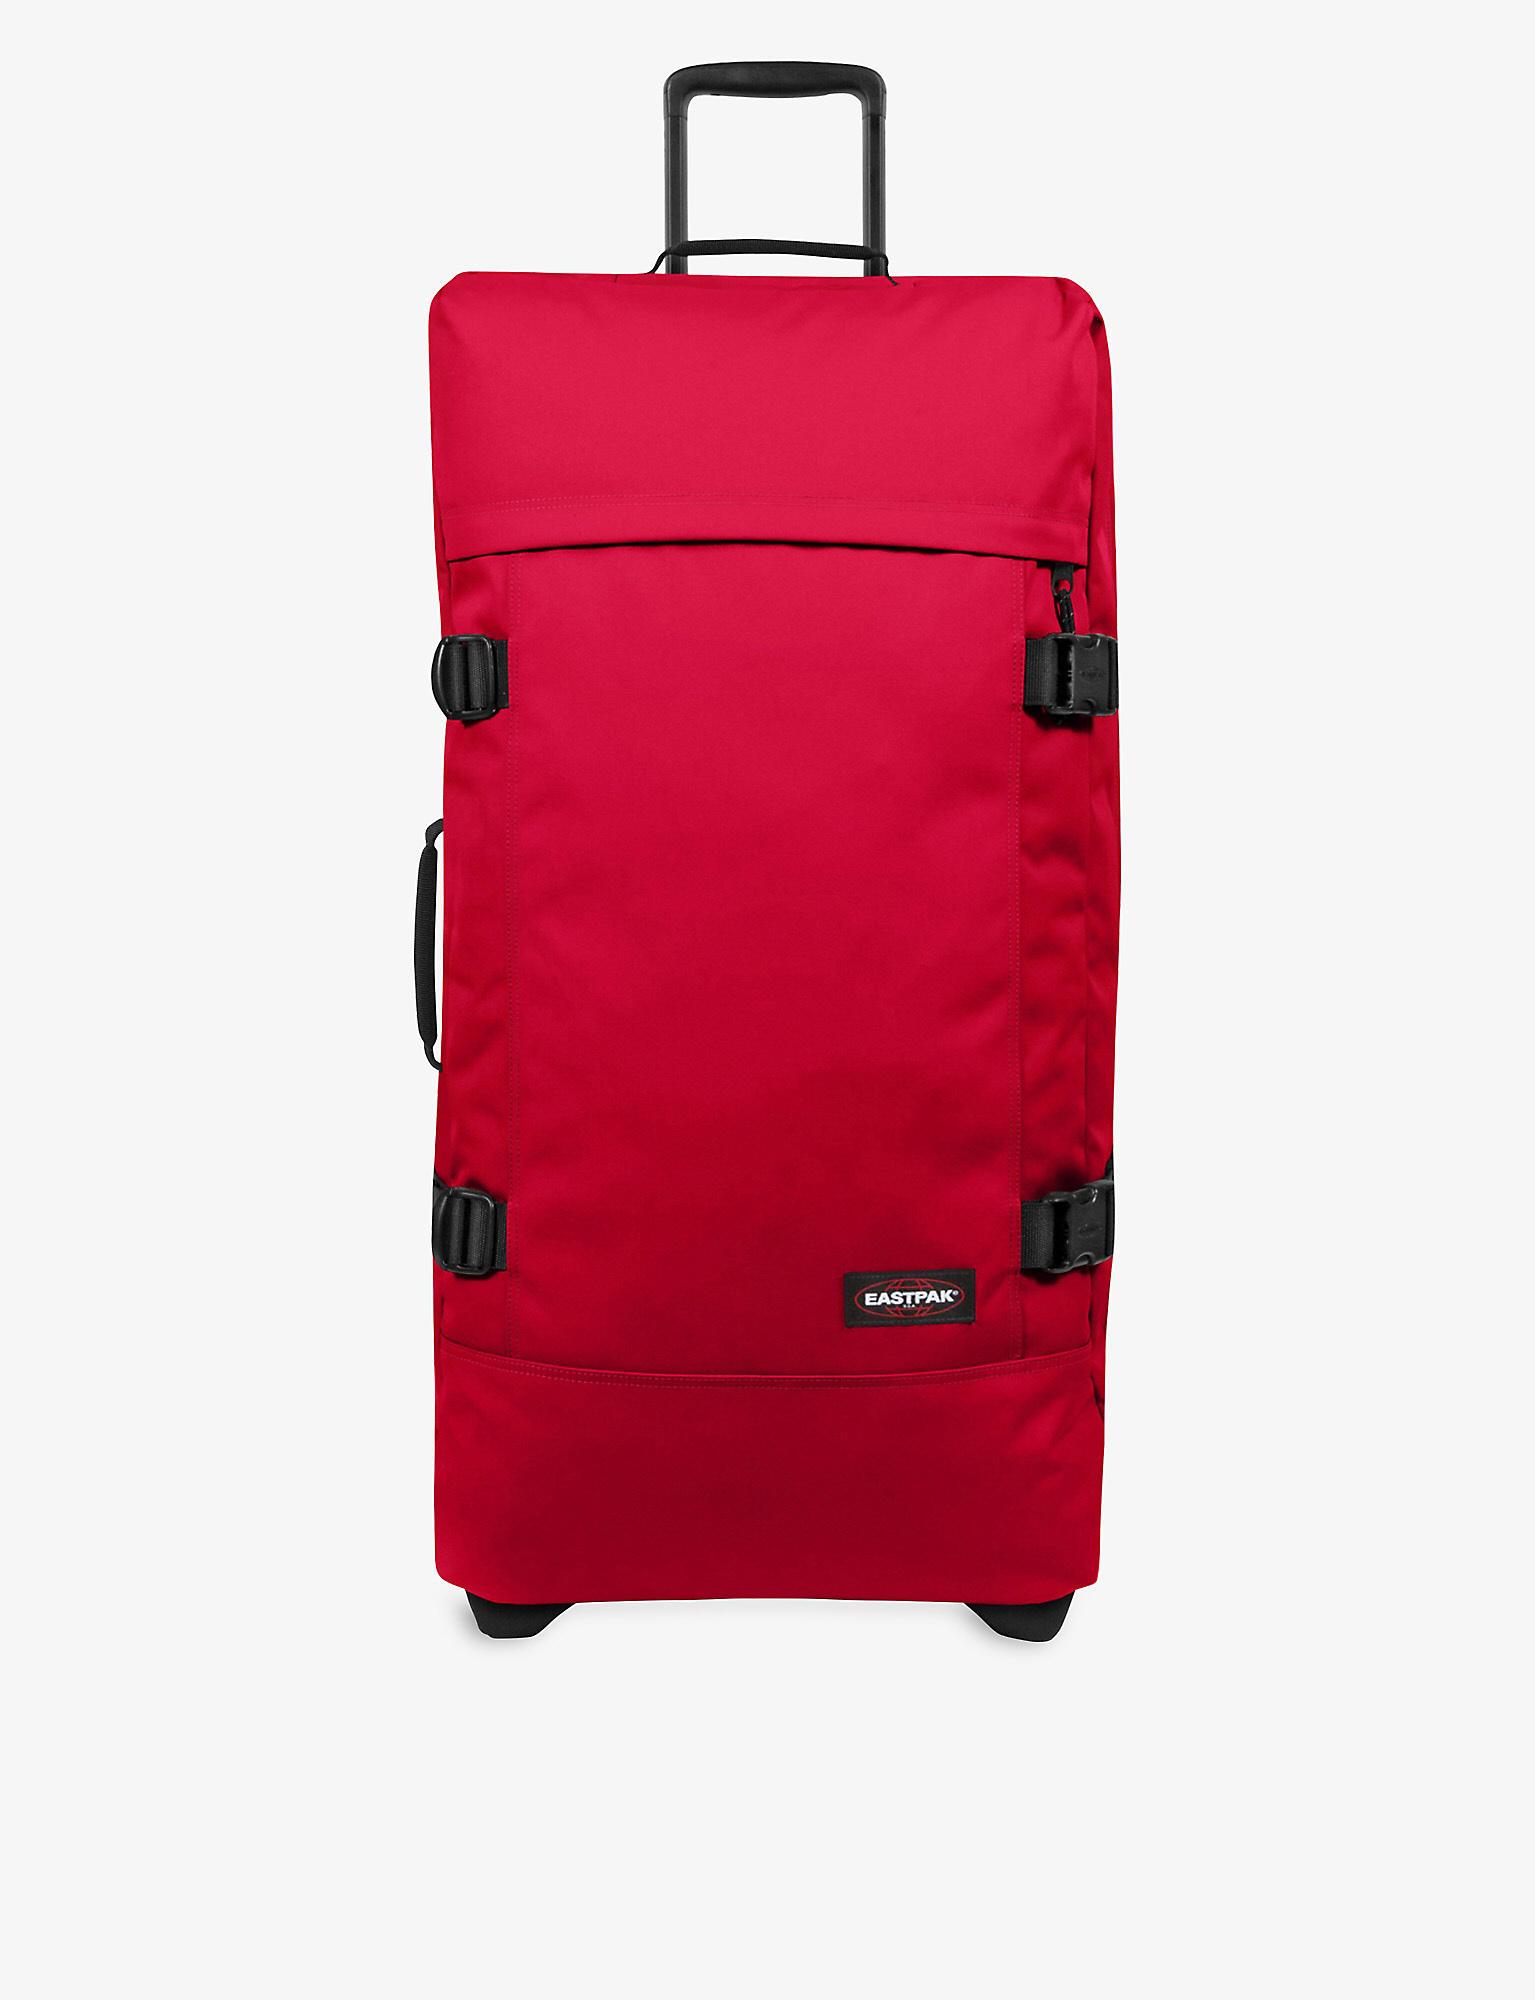 Eastpak Tranverz Large Four-wheel Shell Suitcase 79cm in Red | Lyst